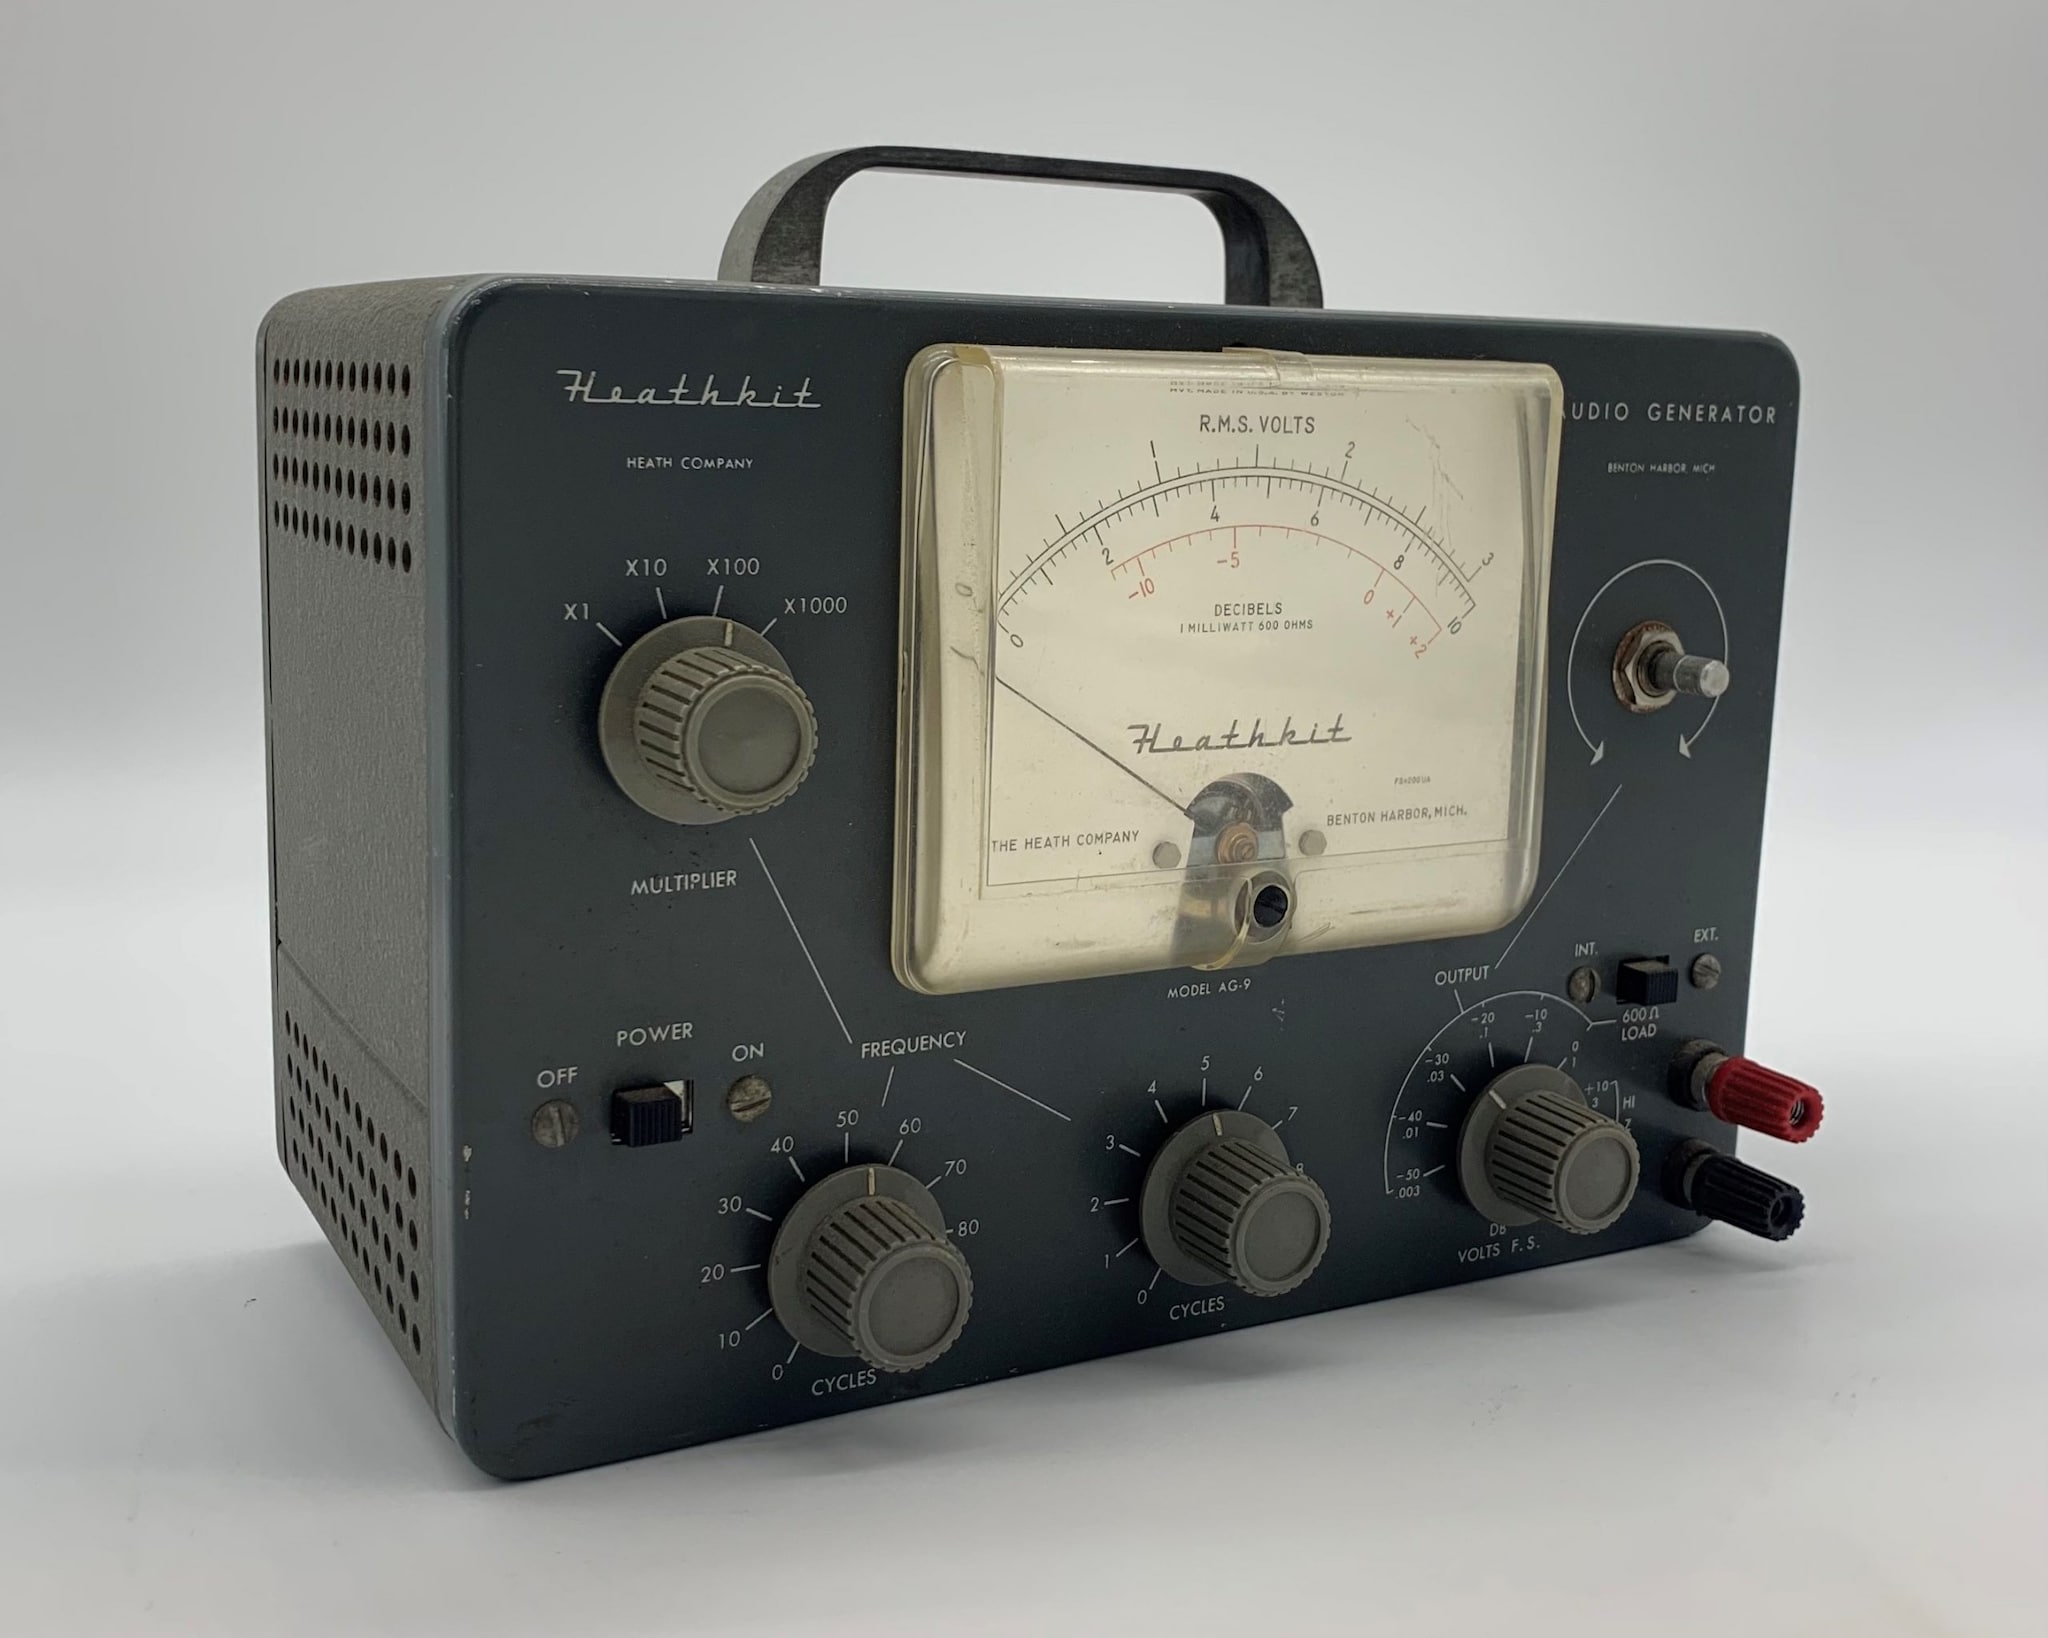 Heathkit Audio Generator consists of a dark gray box and a frequency monitor with indicator needle. The kit has knobs to adjust the audio input’s multipliers, cycles, frequency, and voltage.